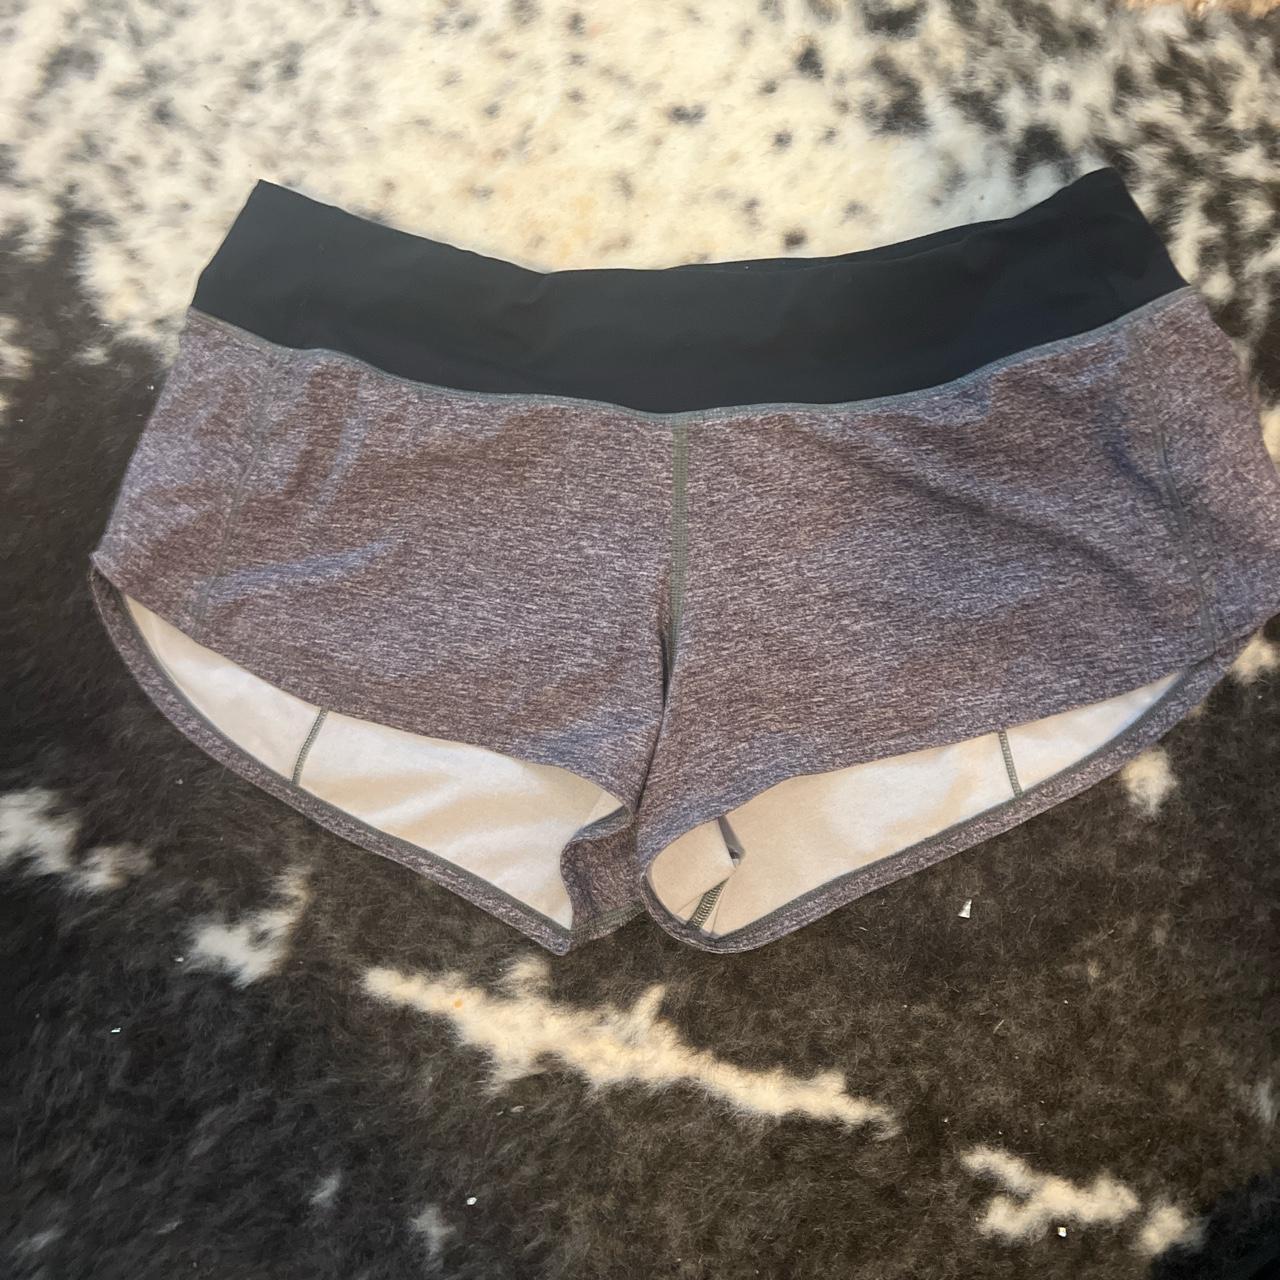 Lululemon speed up low rise 2.5” shorts in size 2. - Depop